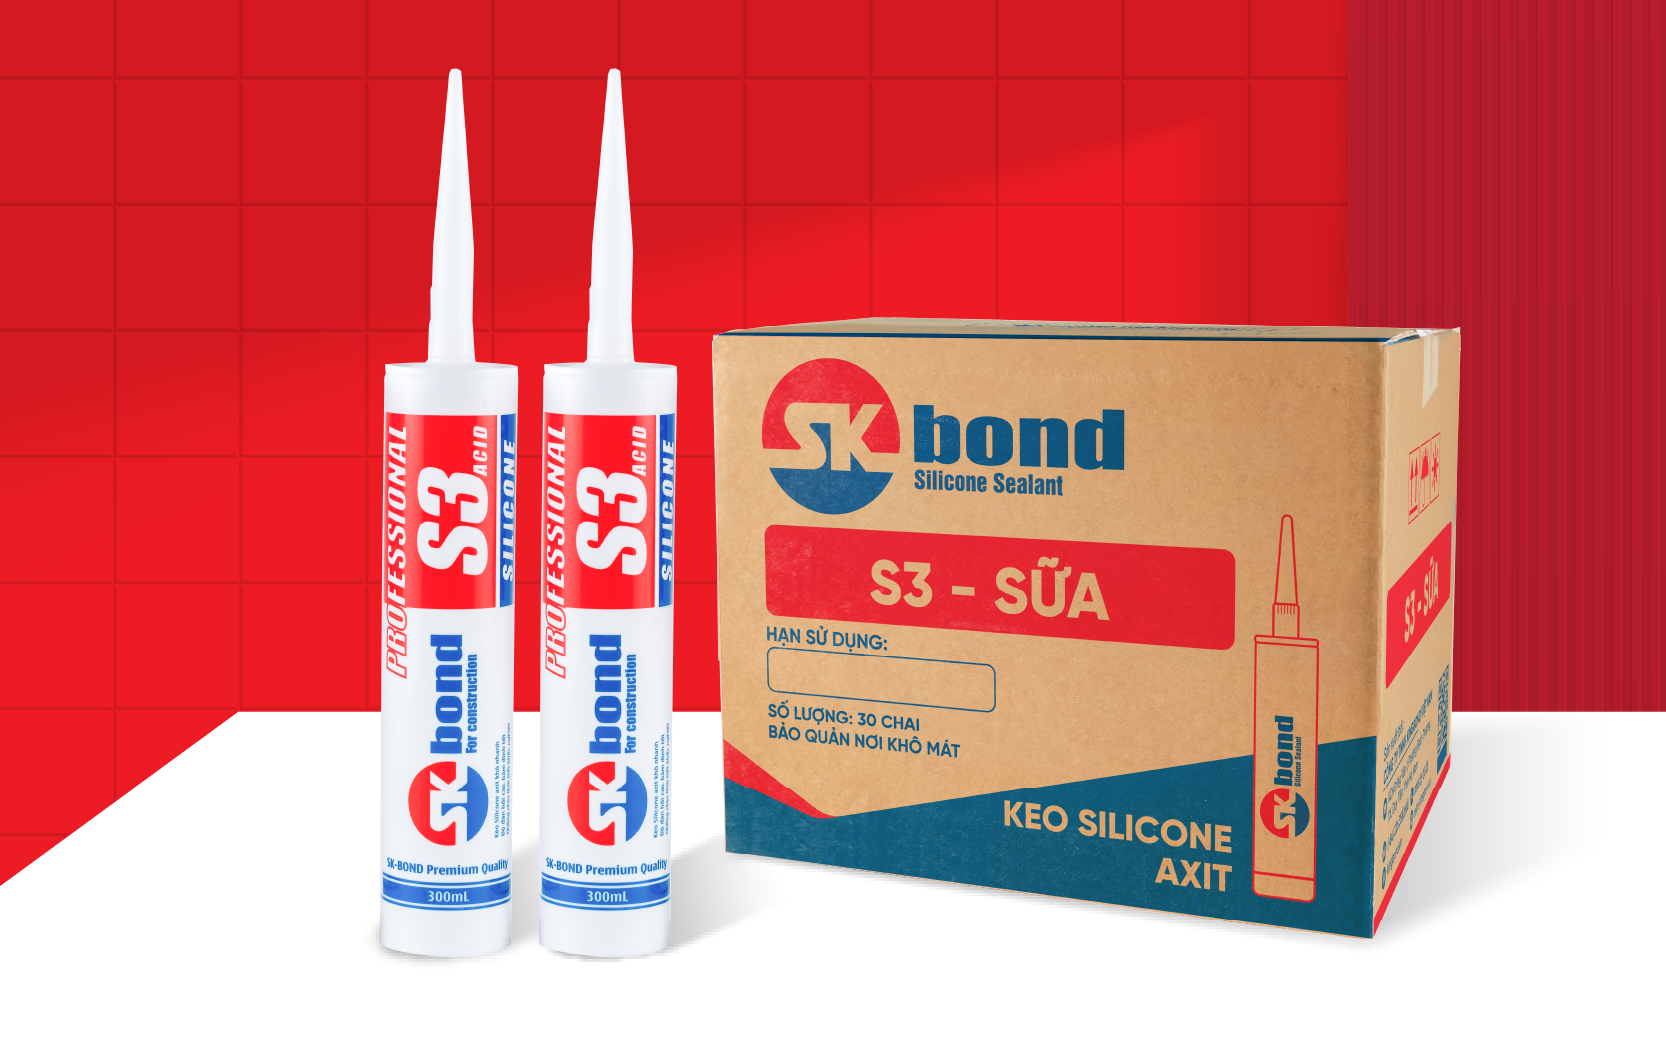 Keo silicone axit S3 - Công Ty TNHH Kingbond Việt Nam